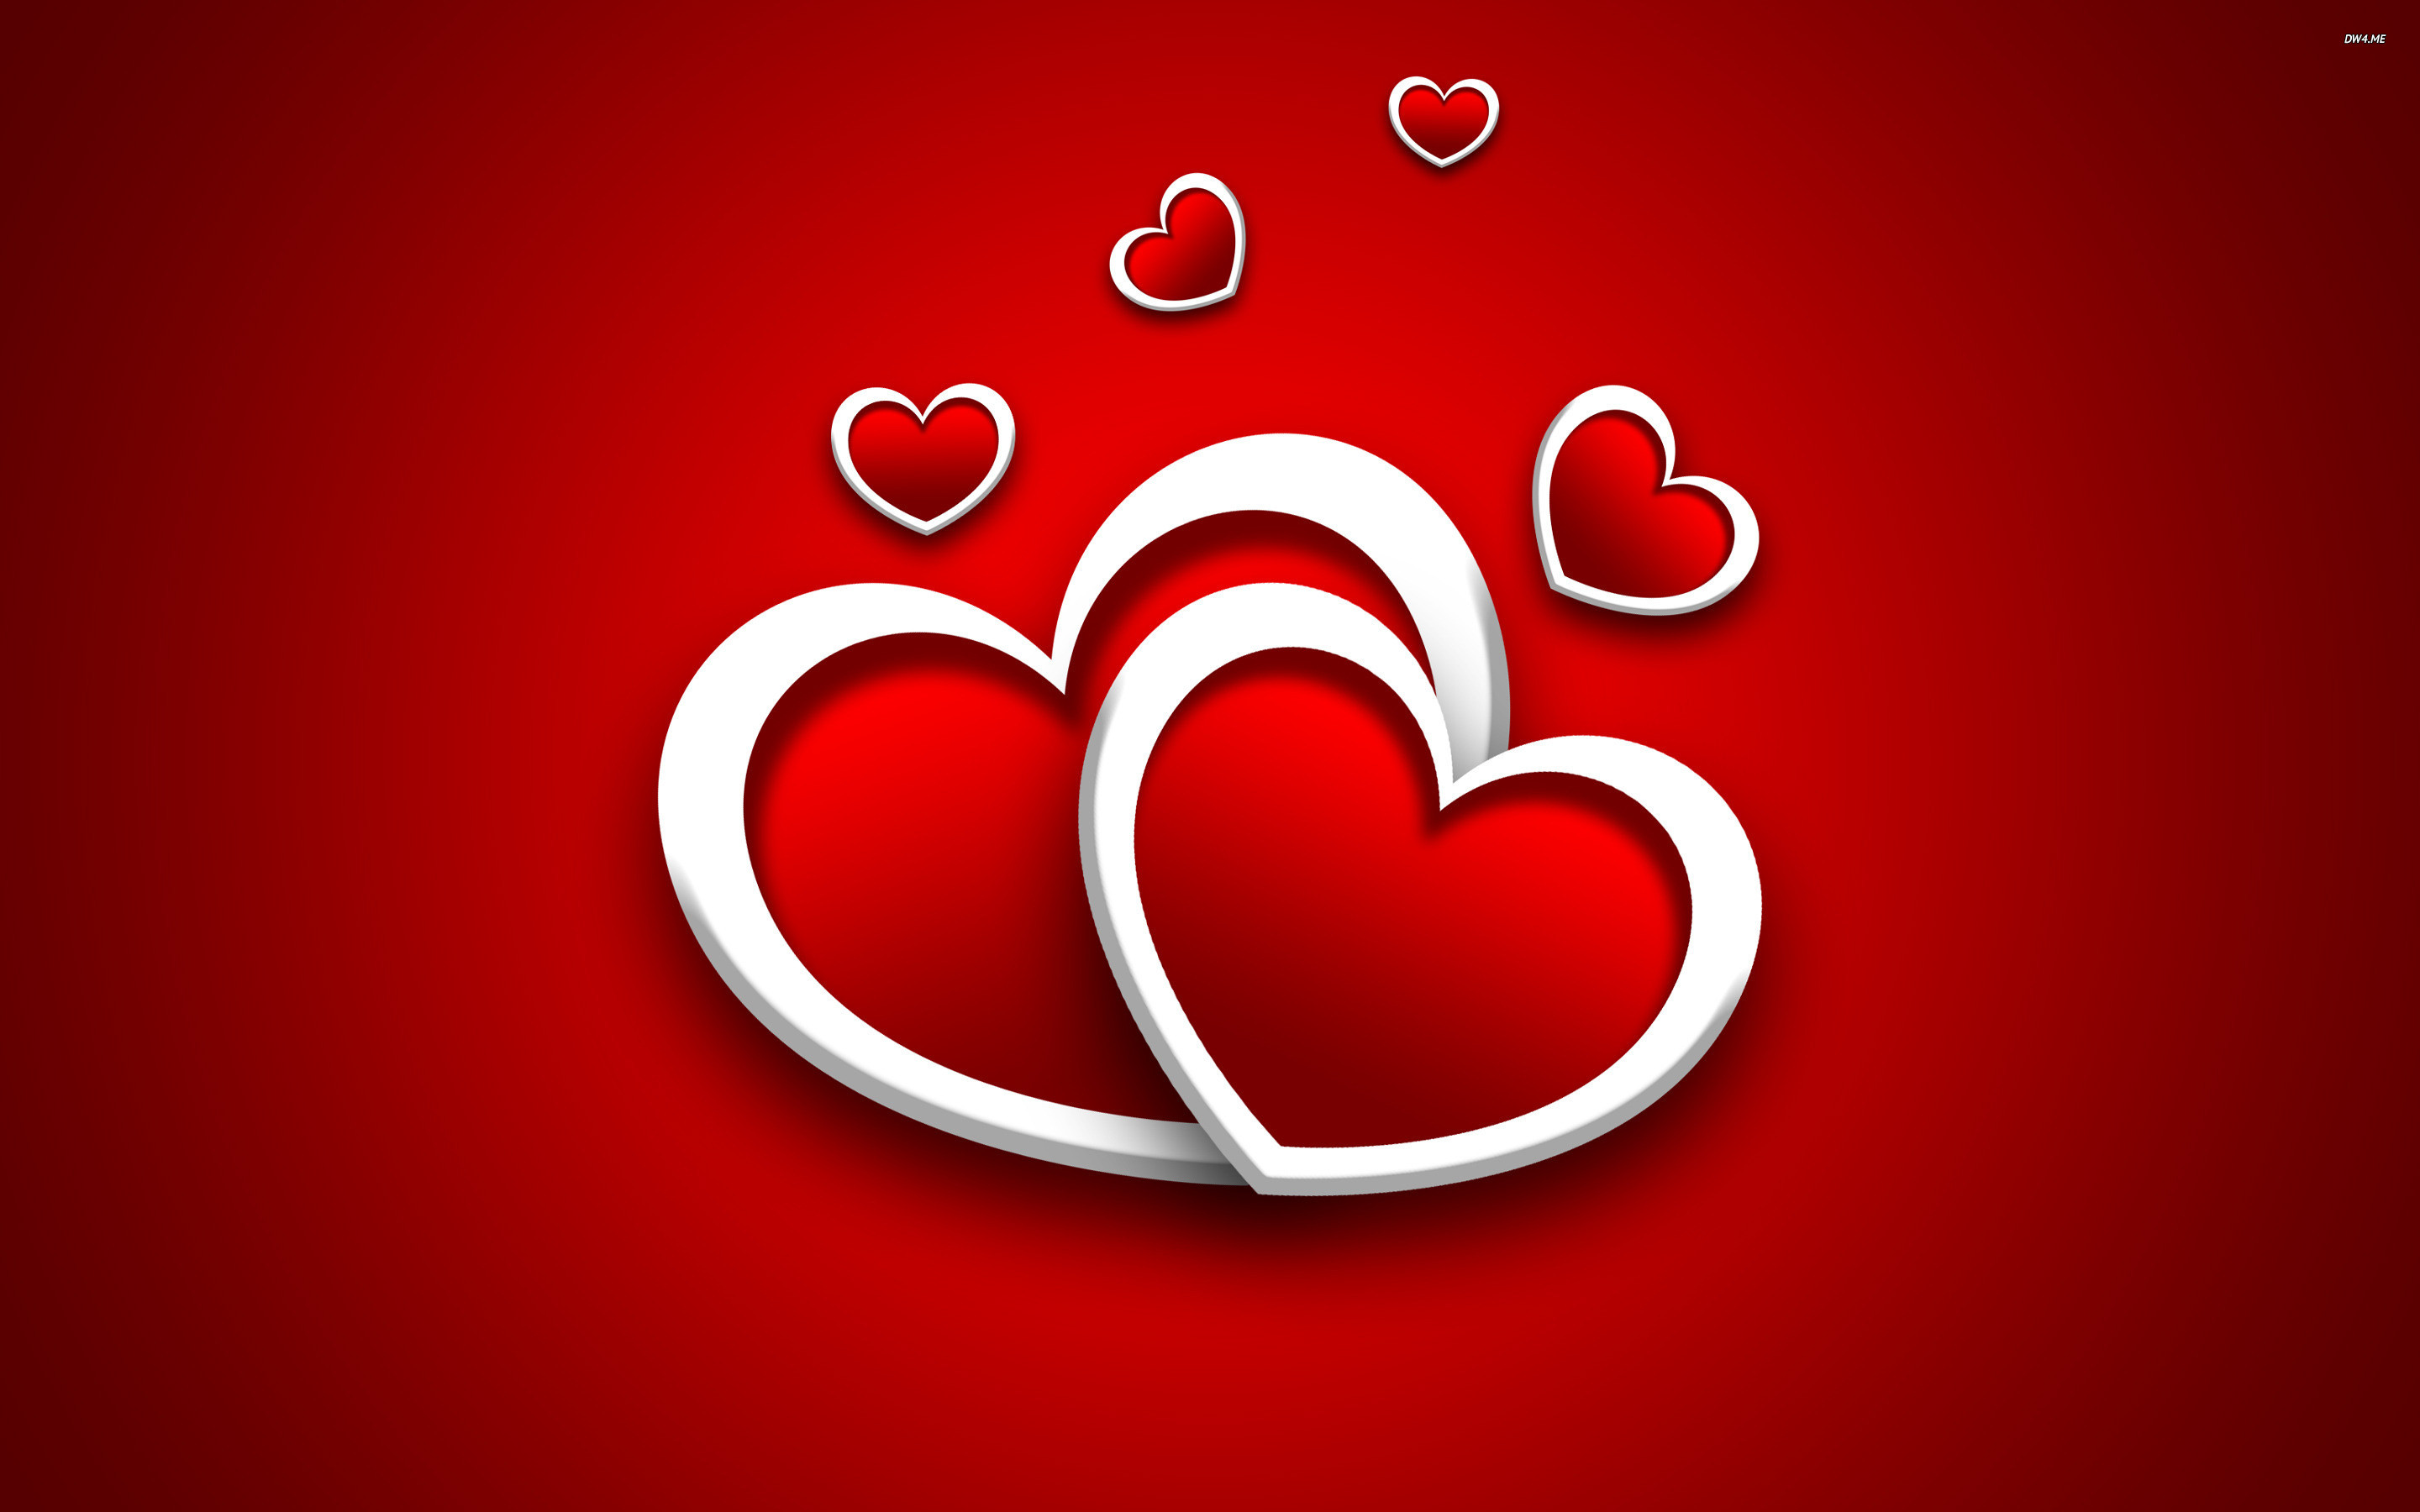 2880x1800 ... Letter C In Heart Wallpaper 47+ Hd Quality Heart Images, Heart  Wallpapers Hd Base ...